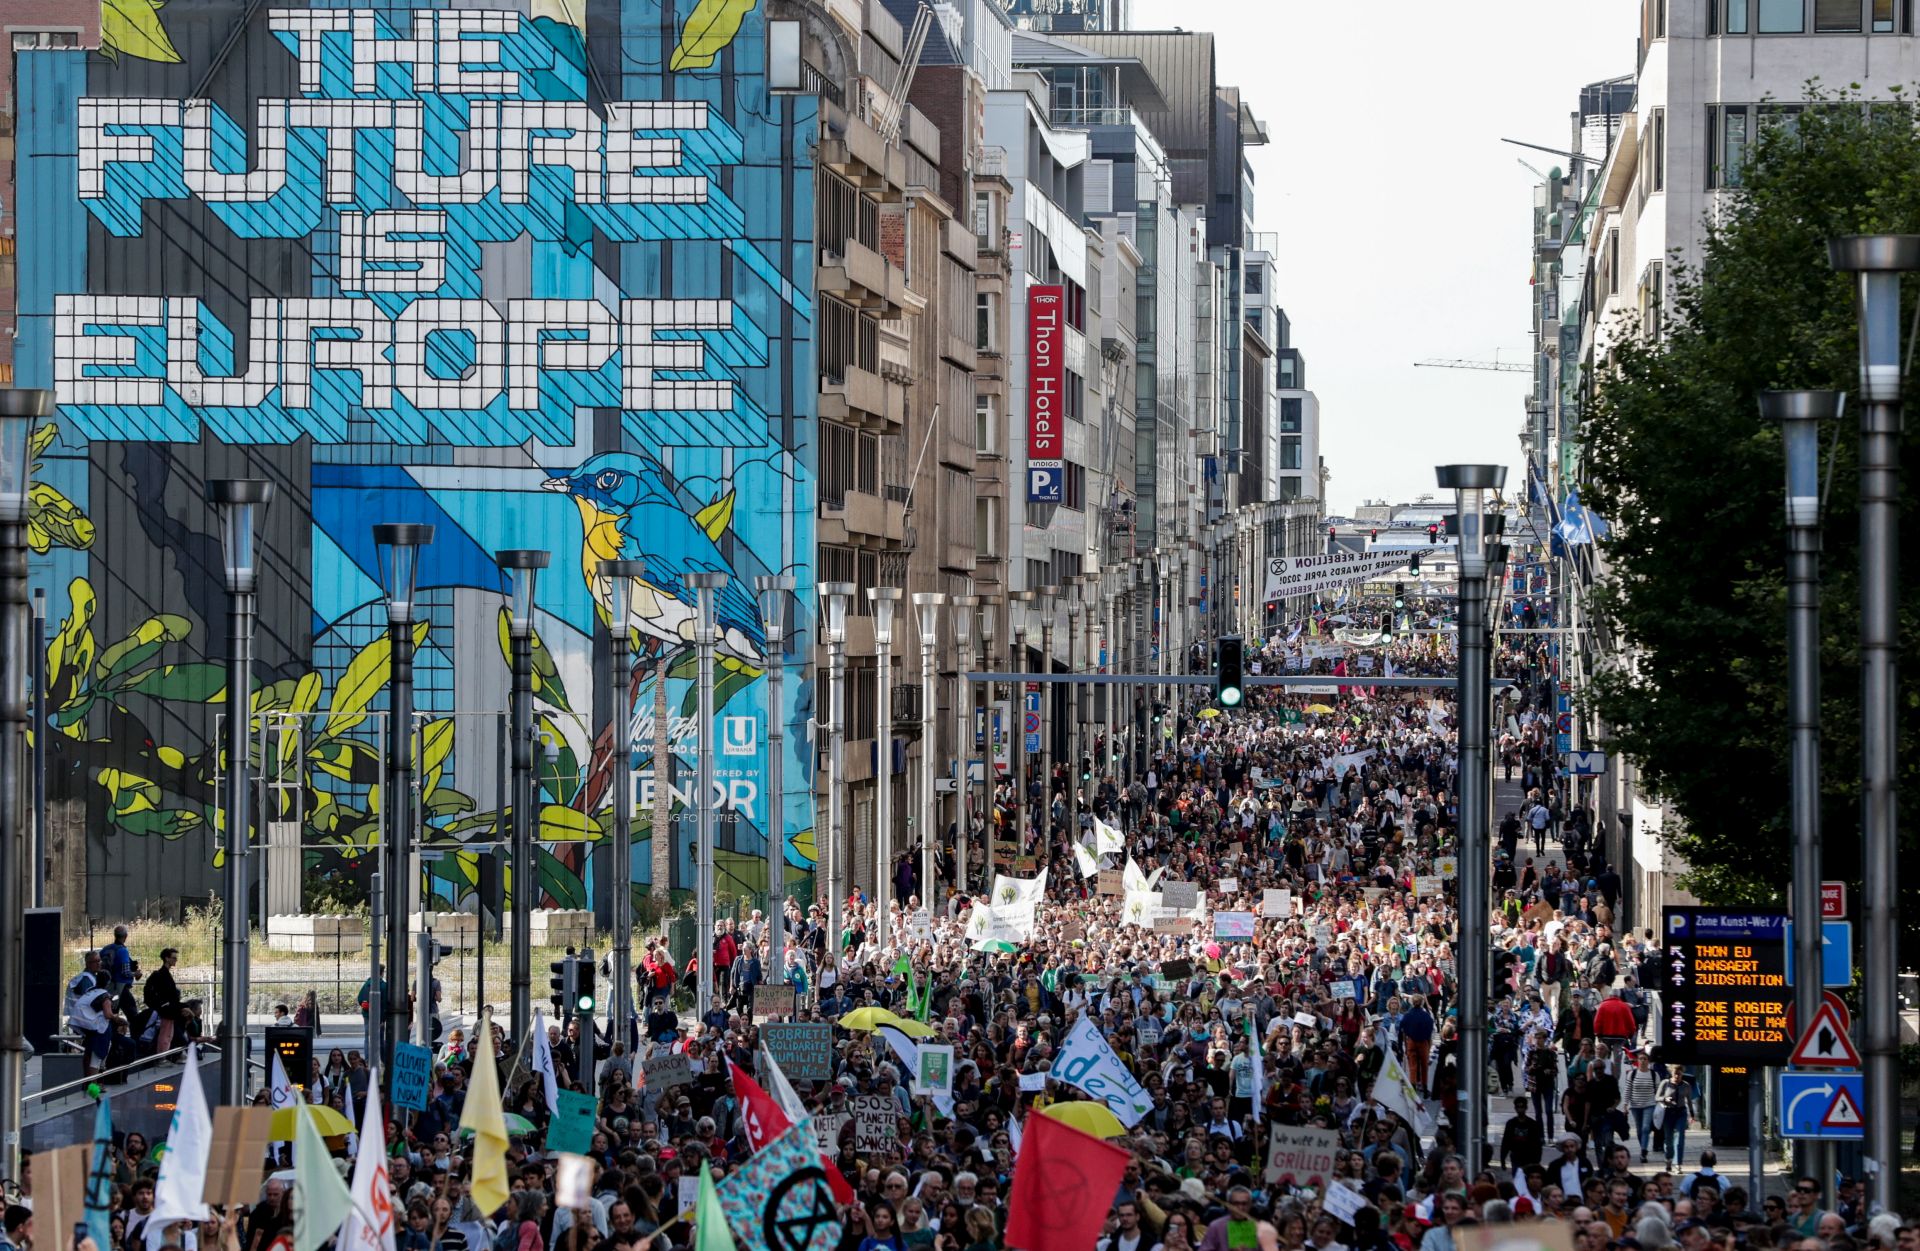 epa07856277 Protesters take part in a demonstration as a part of the Fridays for Future global climate strike in Brussel, Belgium, 20 September 2019. Millions of people around the world are taking part in protests demanding action on climate issues. The Global Strike For Climate is being held only days ahead of the scheduled United Nations Climate Change Summit in New York.  EPA/STEPHANIE LECOCQ